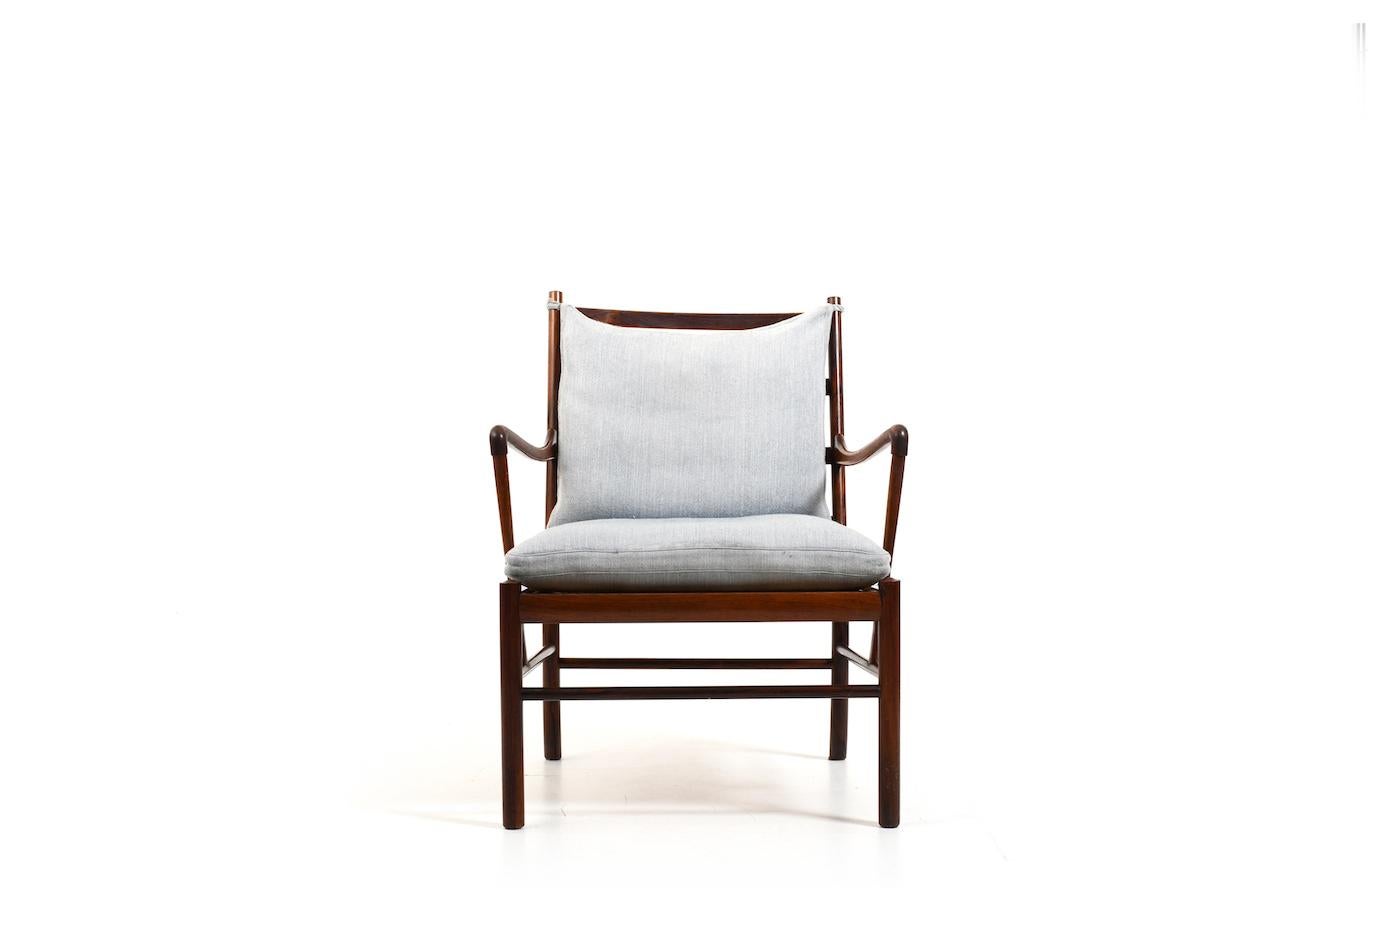 Scandinavian Modern Vintage PJ-149 Colonial Chair by Ole Wanscher for P. Jeppesen 1949 For Sale